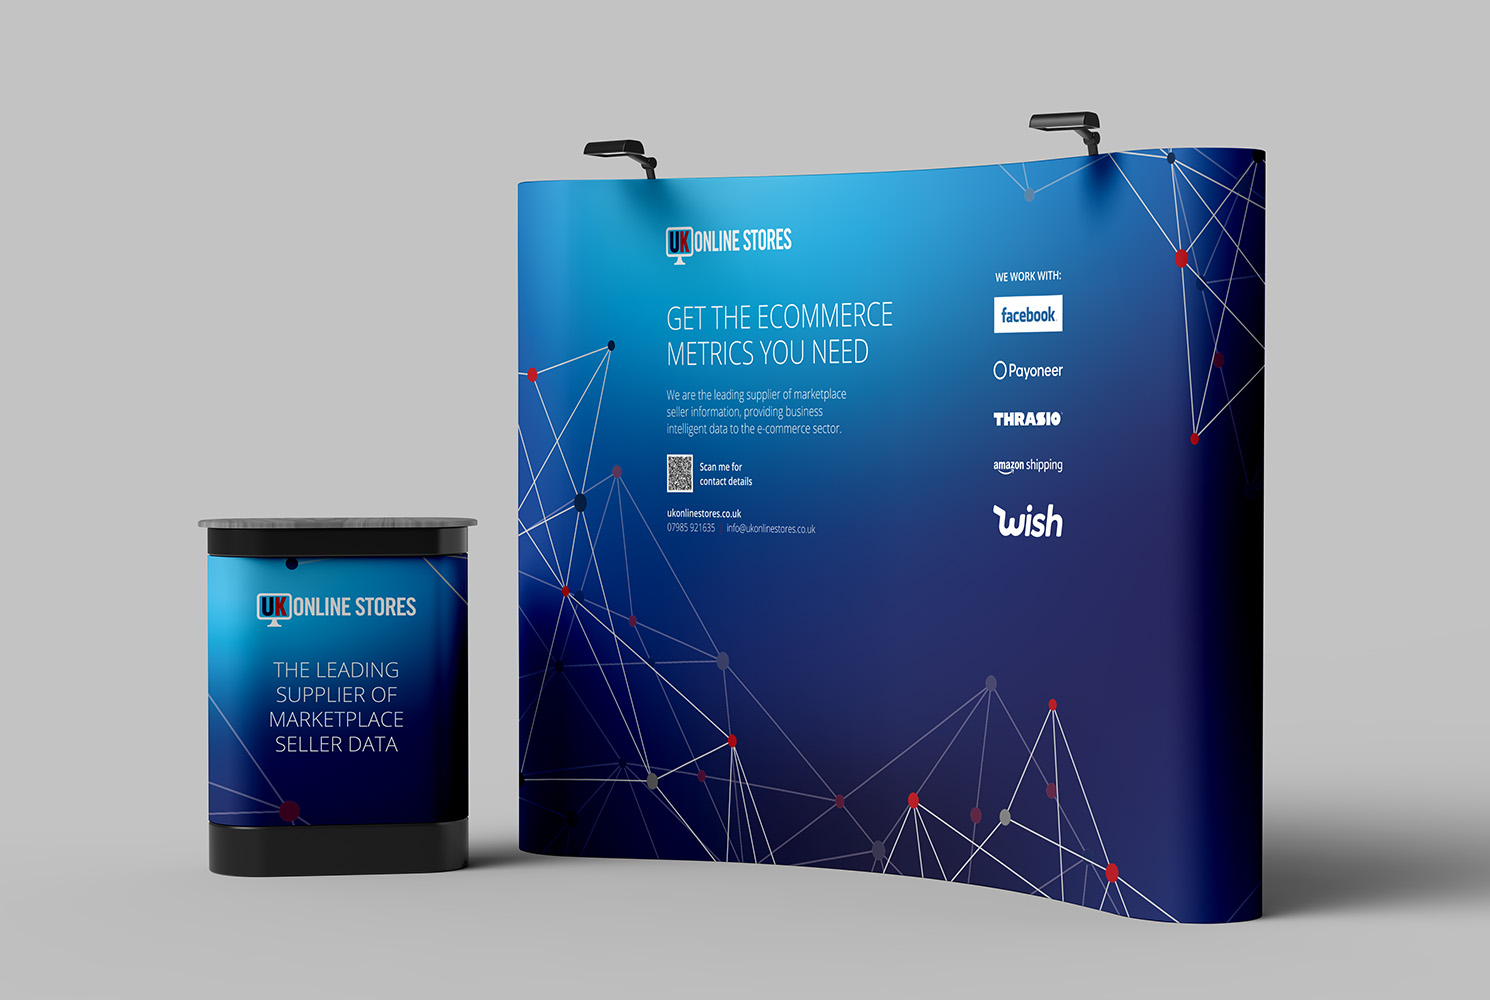 UK Online Stores exhibition stand